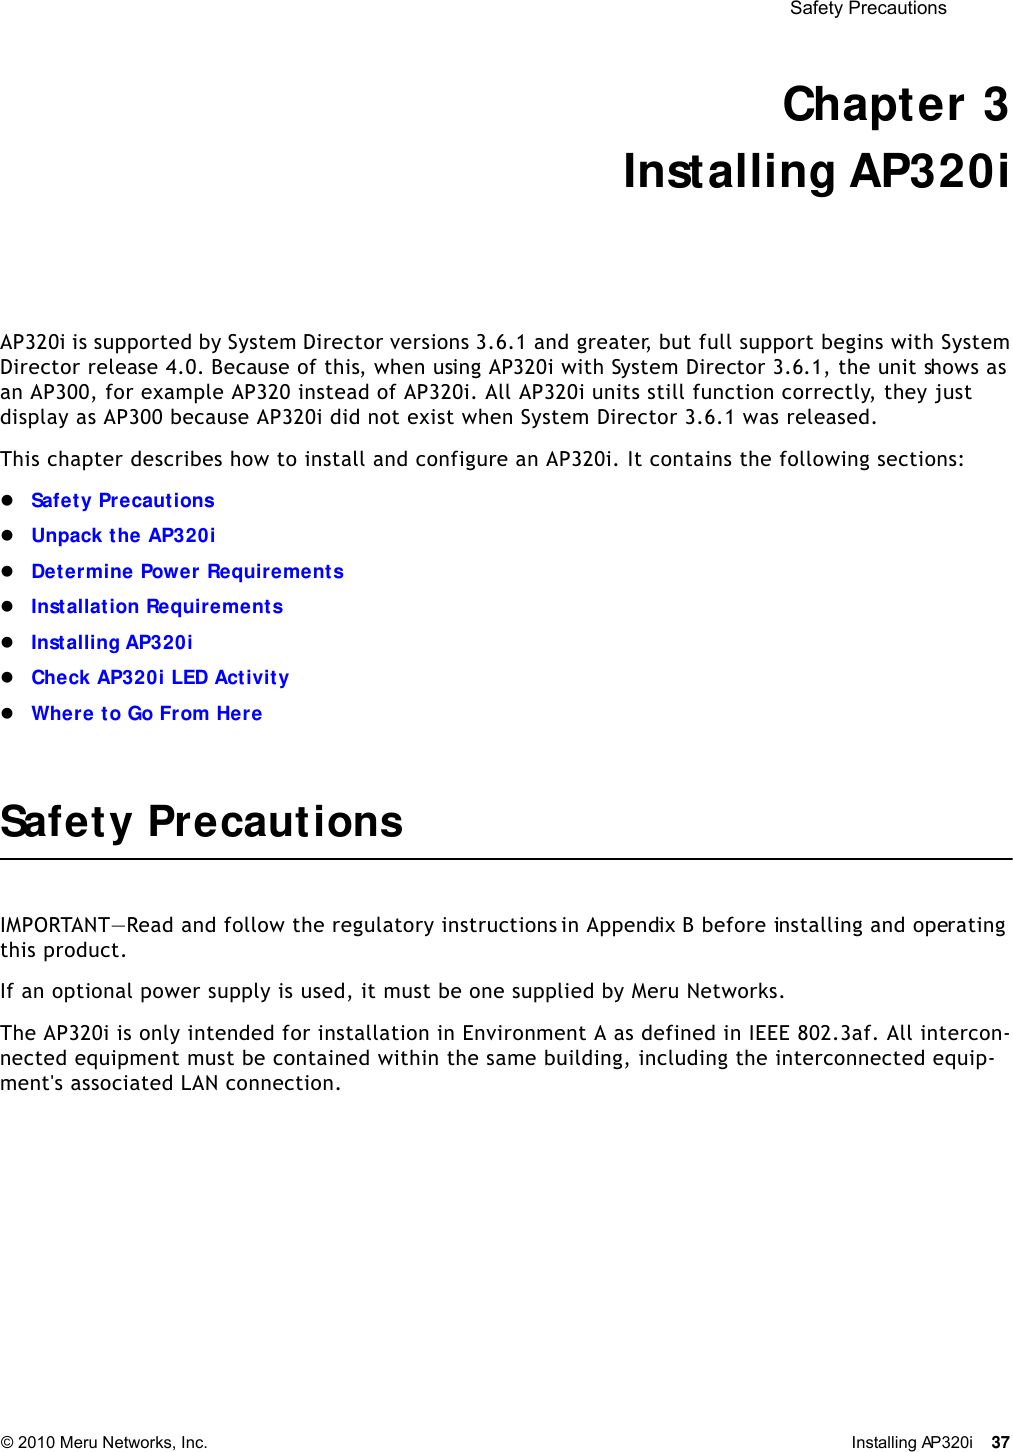  Safety Precautions © 2010 Meru Networks, Inc. Installing AP320i 37 Chapter 3Installing AP320iAP320i is supported by System Director versions 3.6.1 and greater, but full support begins with System Director release 4.0. Because of this, when using AP320i with System Director 3.6.1, the unit shows as an AP300, for example AP320 instead of AP320i. All AP320i units still function correctly, they just display as AP300 because AP320i did not exist when System Director 3.6.1 was released.This chapter describes how to install and configure an AP320i. It contains the following sections:Safety PrecautionsUnpack the AP320iDetermine Power RequirementsInstallation RequirementsInstalling AP320iCheck AP320i LED ActivityWhere to Go From HereSafety PrecautionsIMPORTANT—Read and follow the regulatory instructions in Appendix B before installing and operating this product.If an optional power supply is used, it must be one supplied by Meru Networks.The AP320i is only intended for installation in Environment A as defined in IEEE 802.3af. All intercon-nected equipment must be contained within the same building, including the interconnected equip-ment&apos;s associated LAN connection.